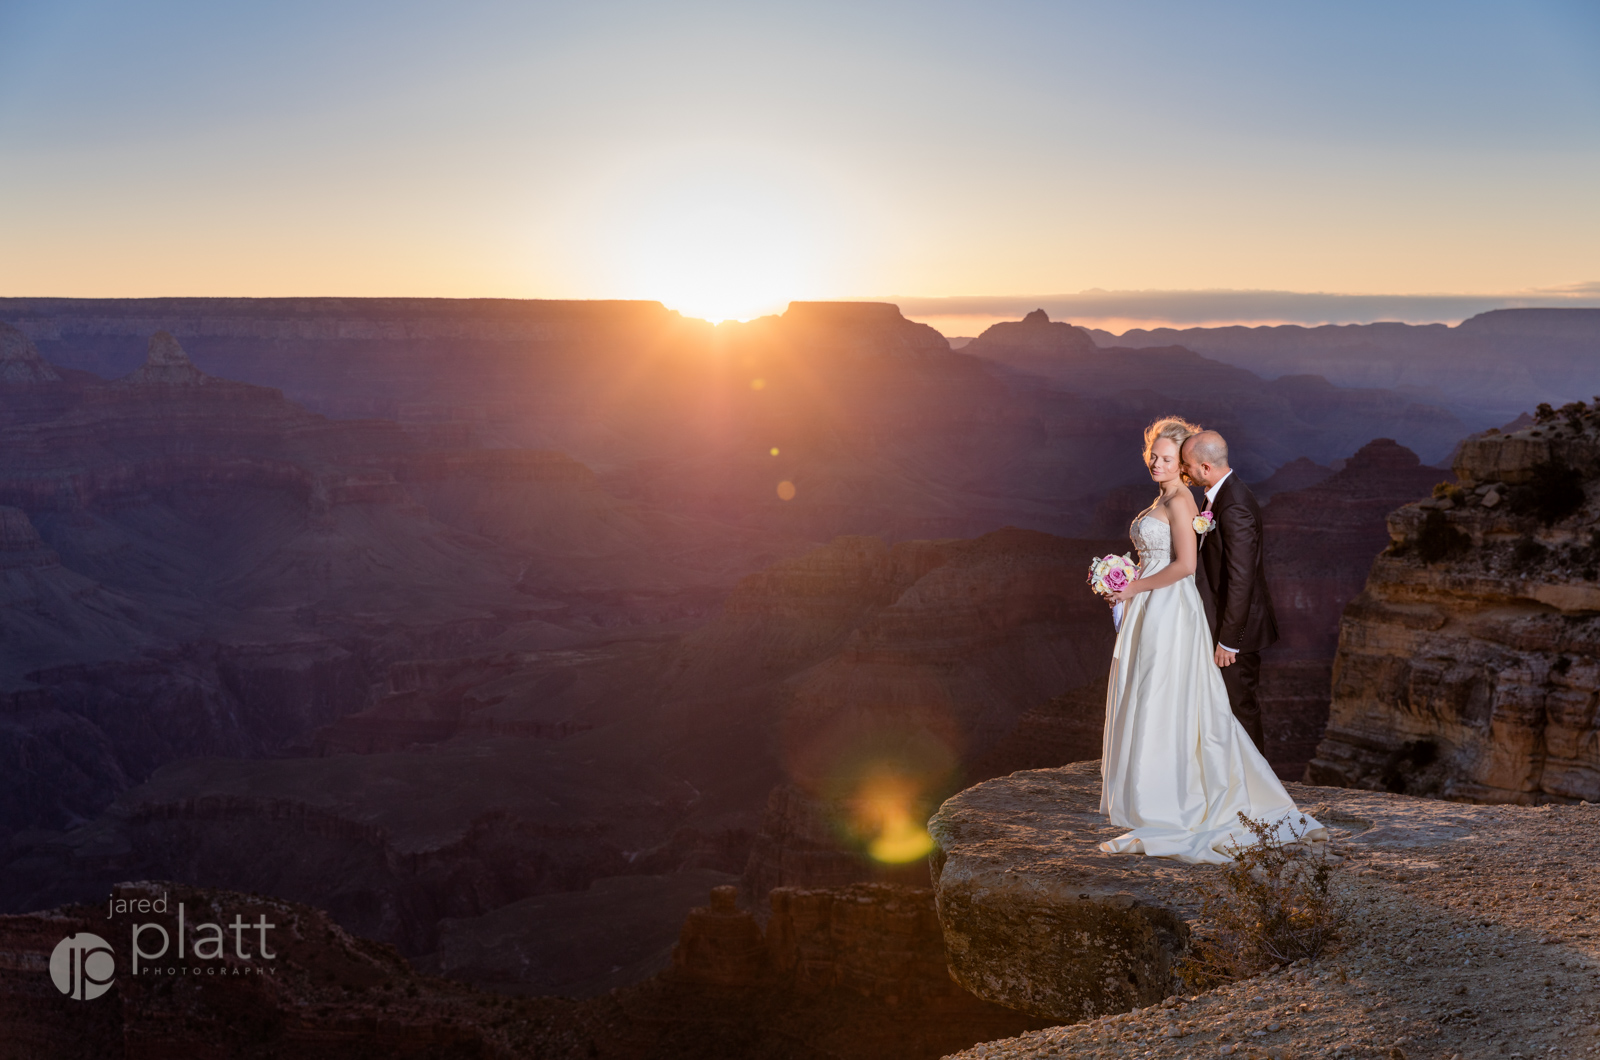 Bride and groom on the edge of the grand canyon at sunrise.